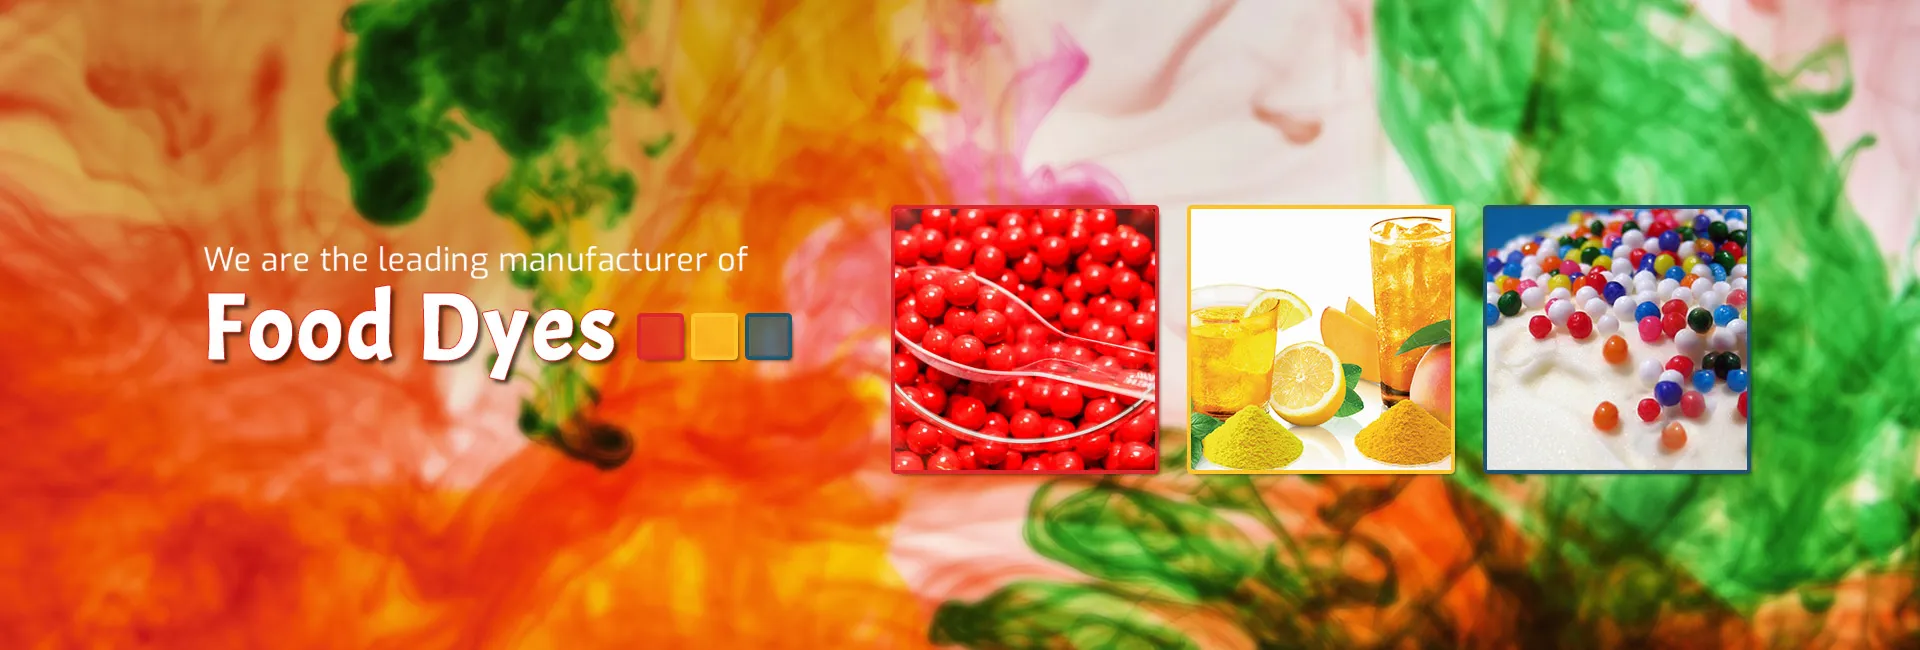 Food Dyes Manufacturer & Suppliers in Brazil